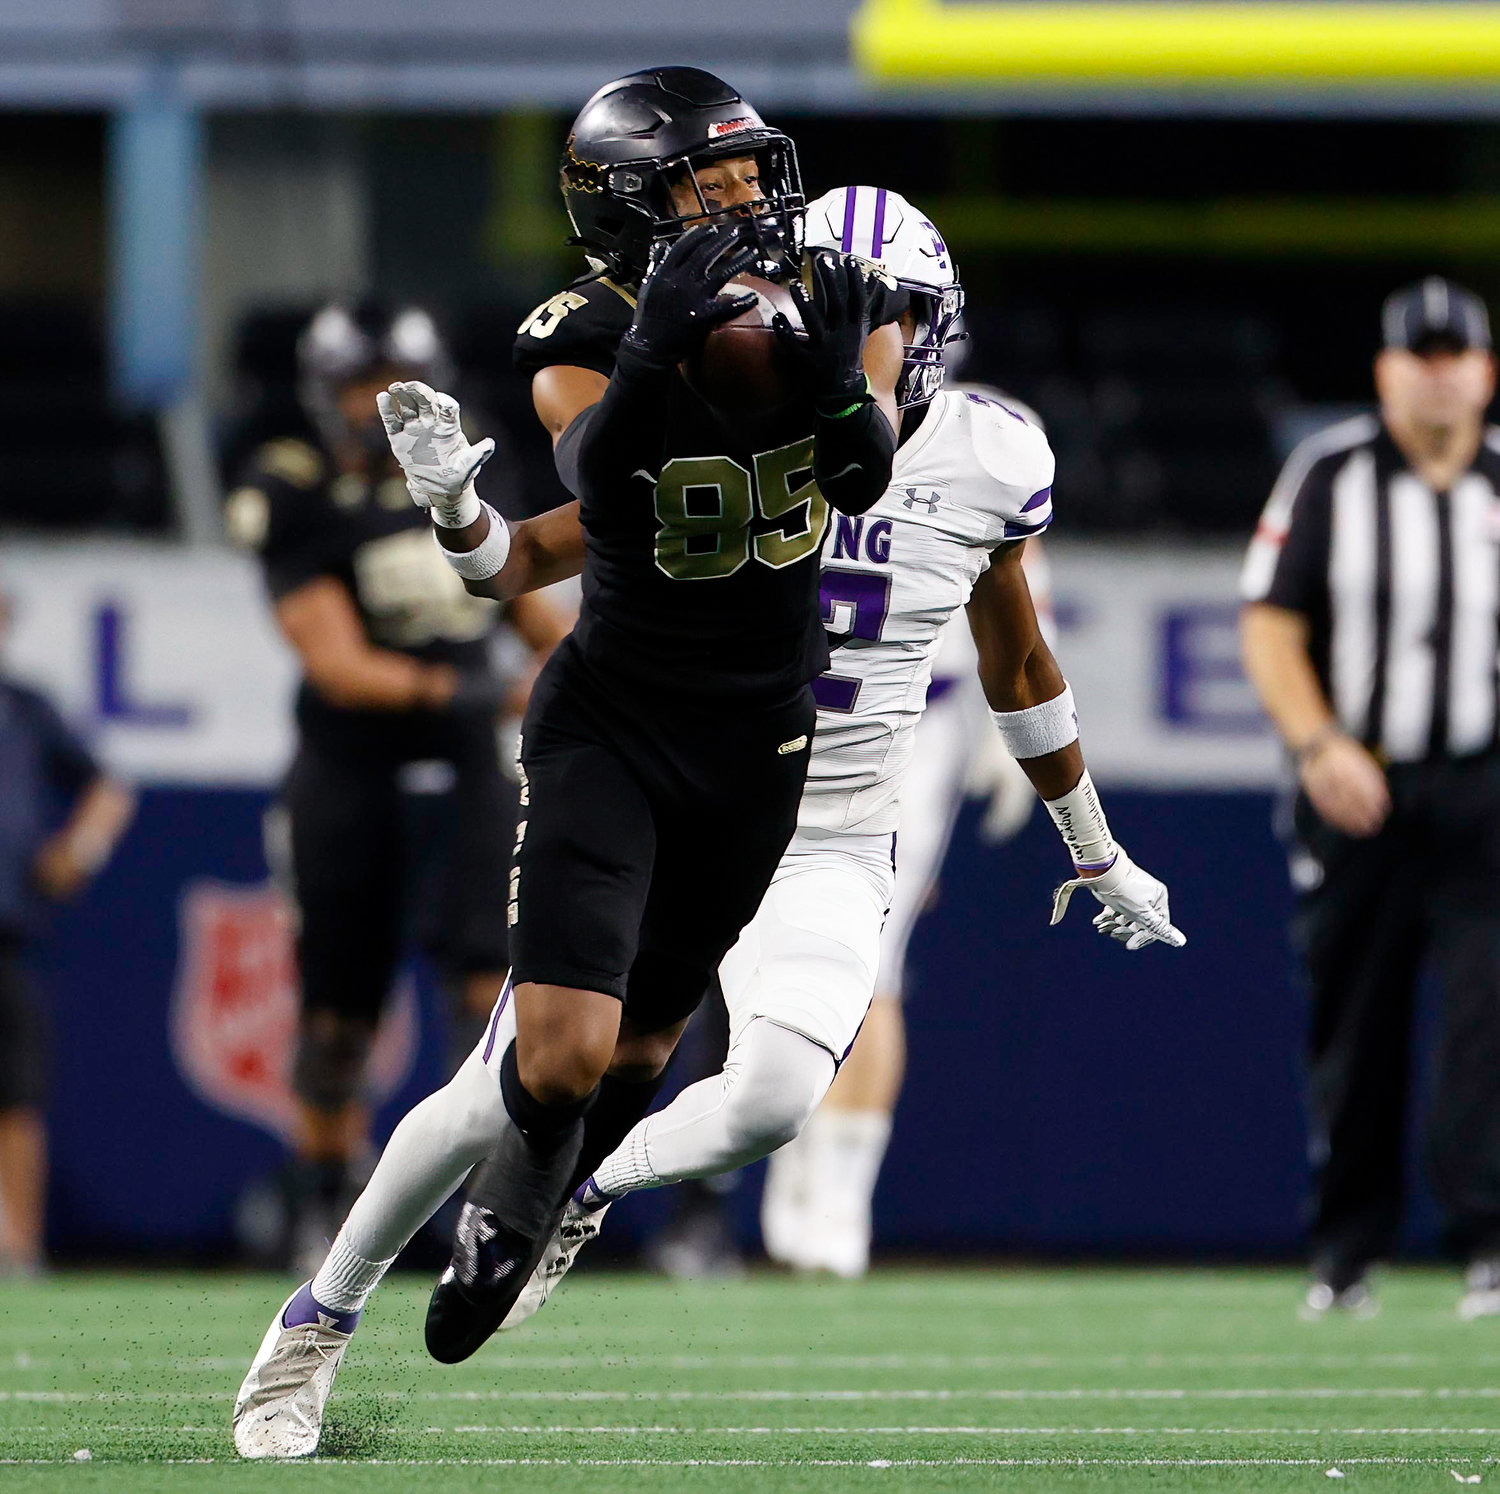 South Oak Cliff wide receiver Joshua Manley (85) makes a catch for a first down during the Class 5A Division II football state championship game between South Oak Cliff and Port Neches-Groves in Arlington, Texas, on Dec. 16, 2022.